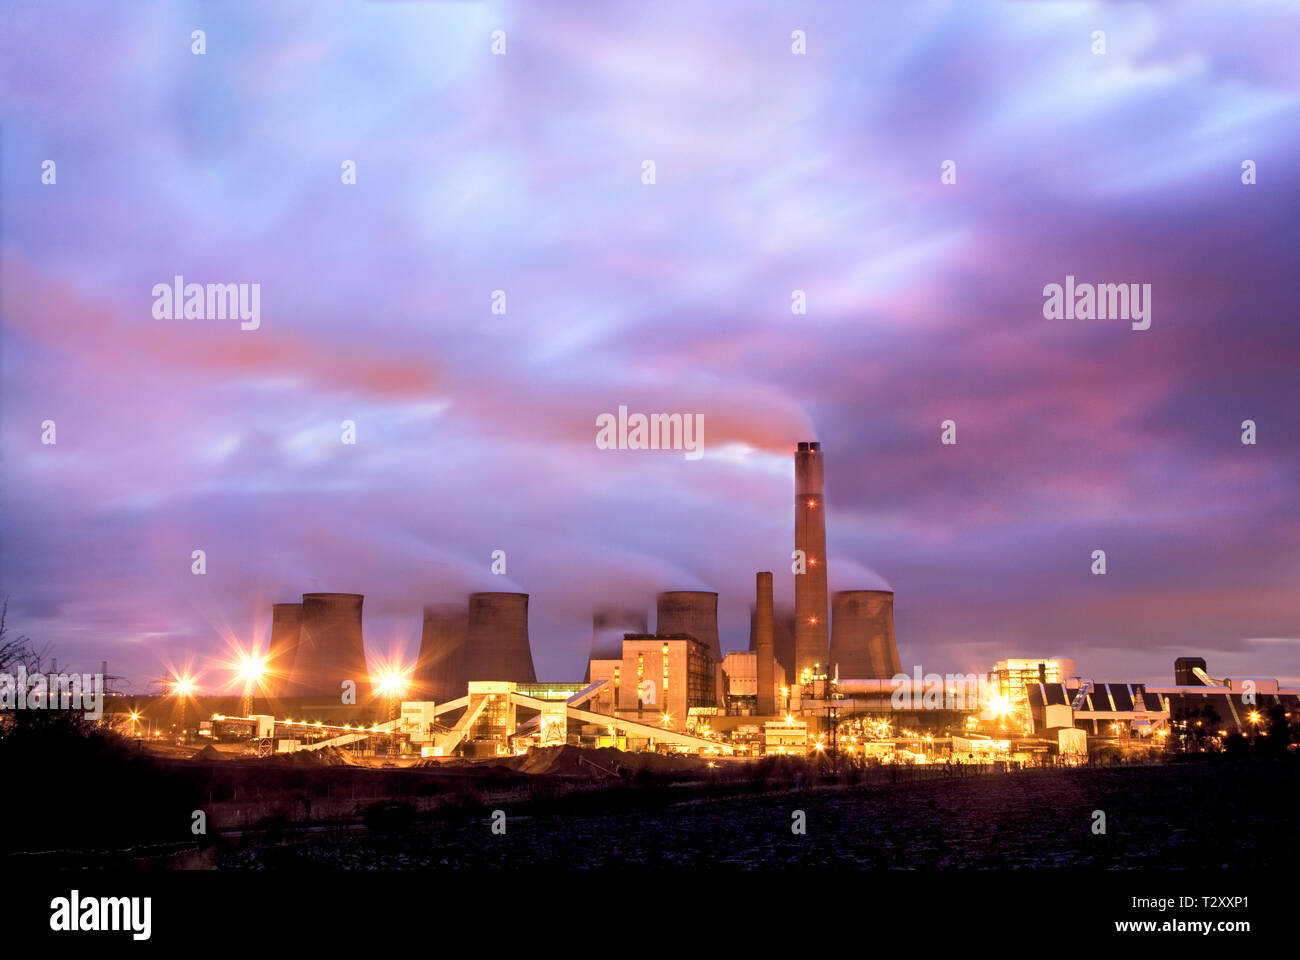 Coal fired power station at dusk Stock Photo